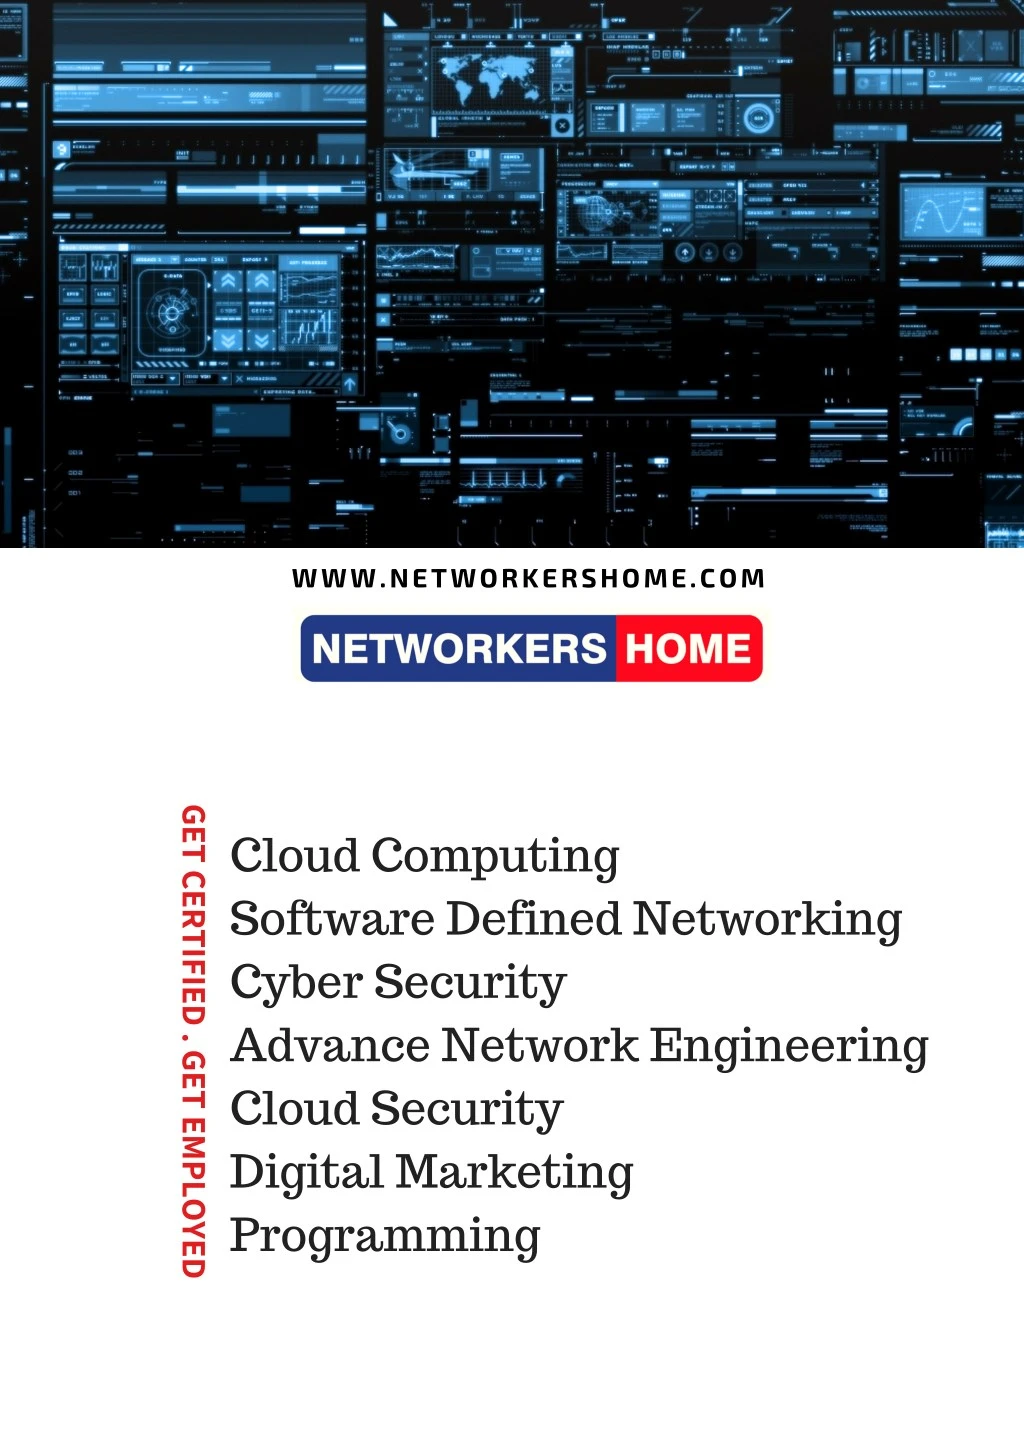 www networkershome com